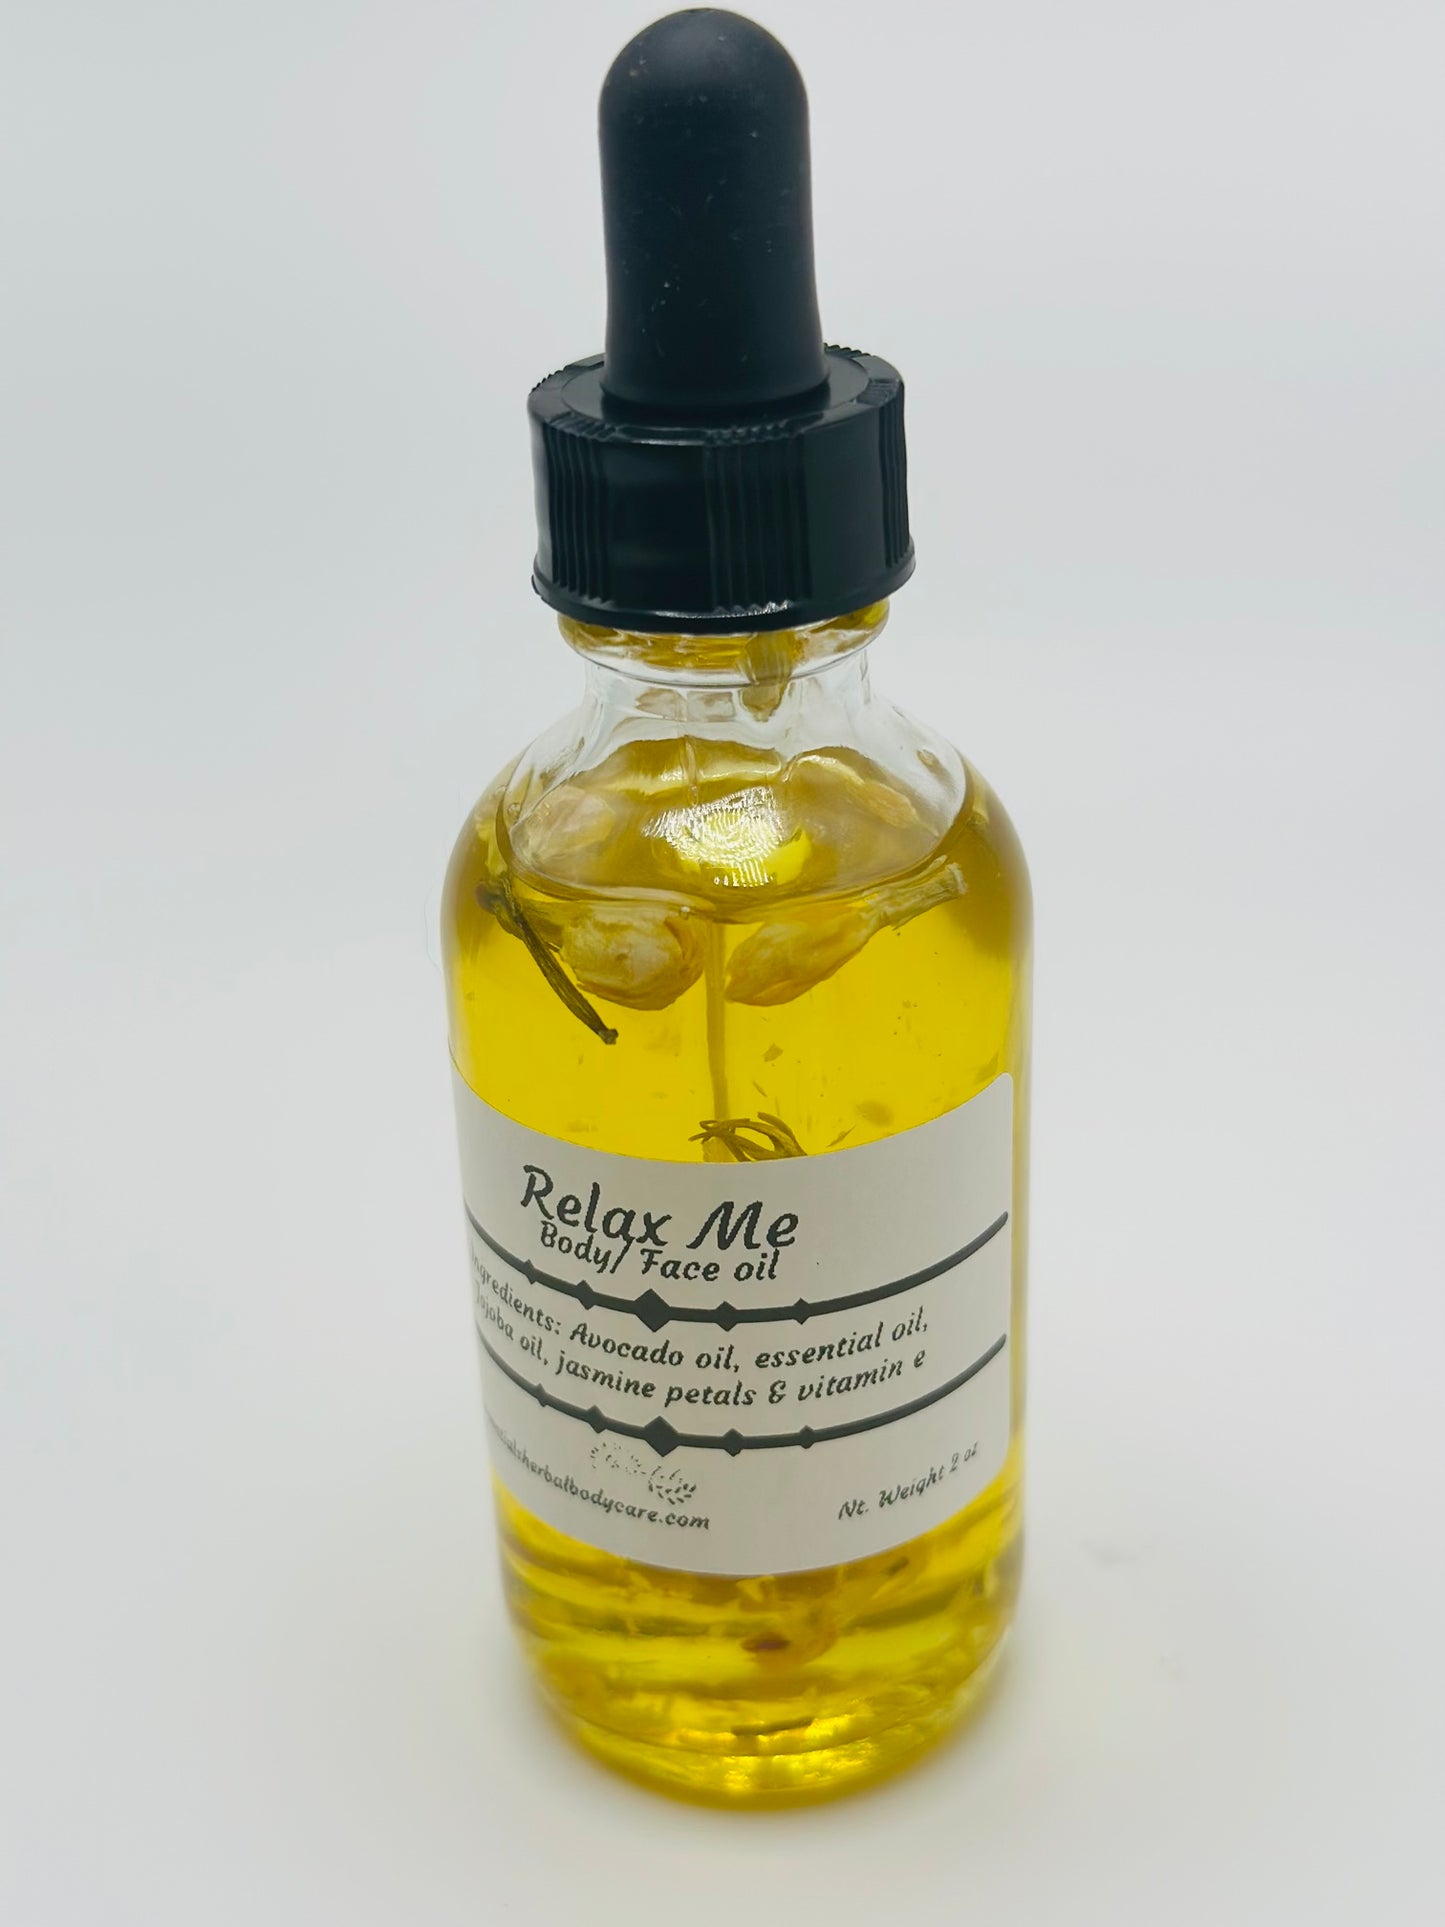 Relax me Oil